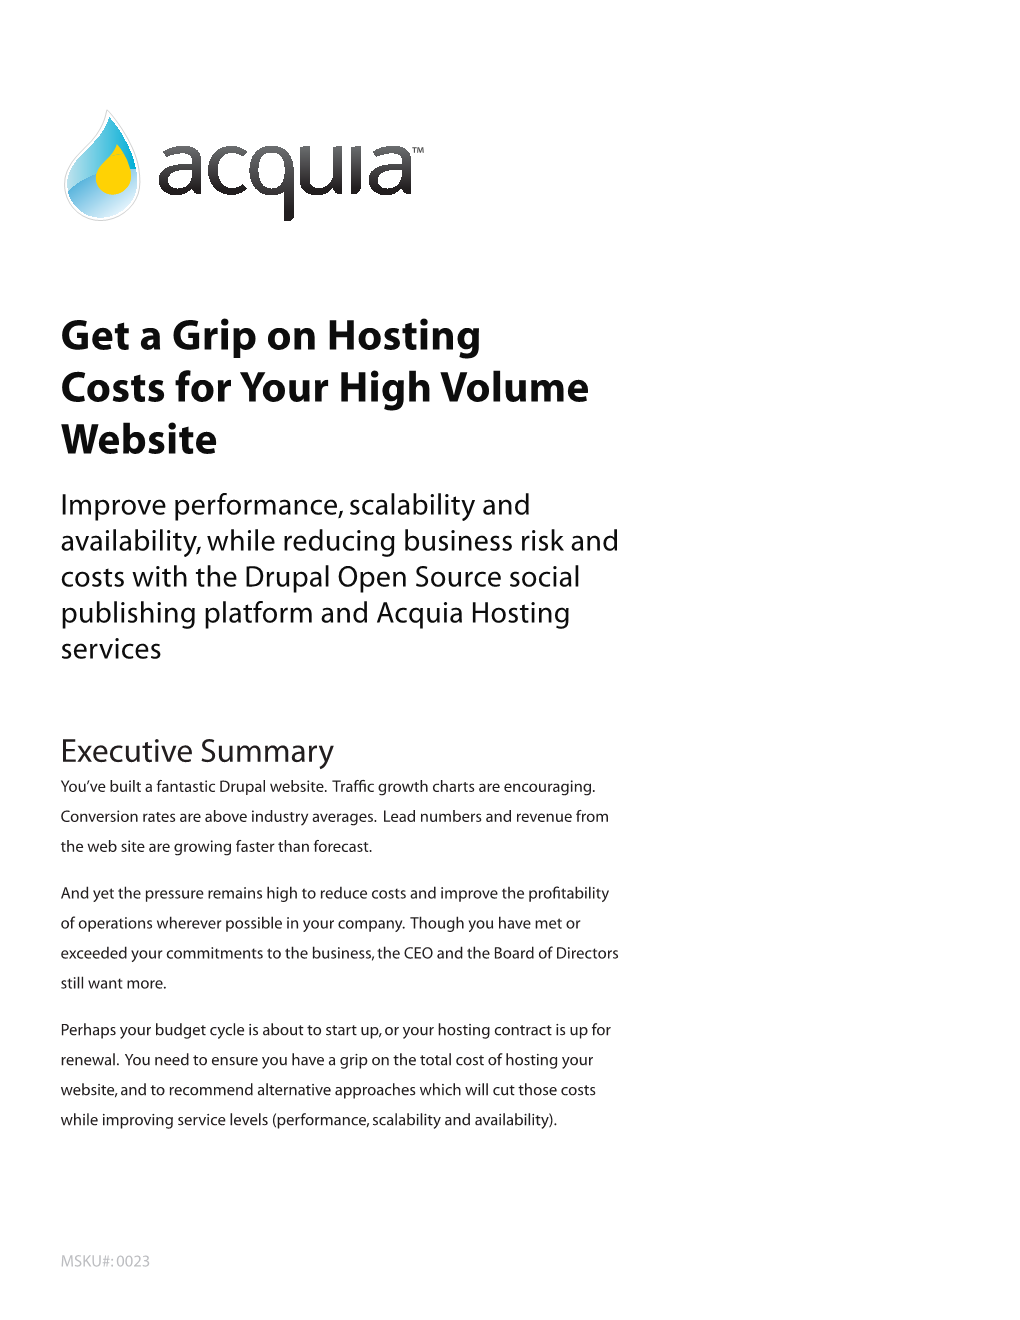 Get a Grip on Hosting Costs for Your High Volume Website